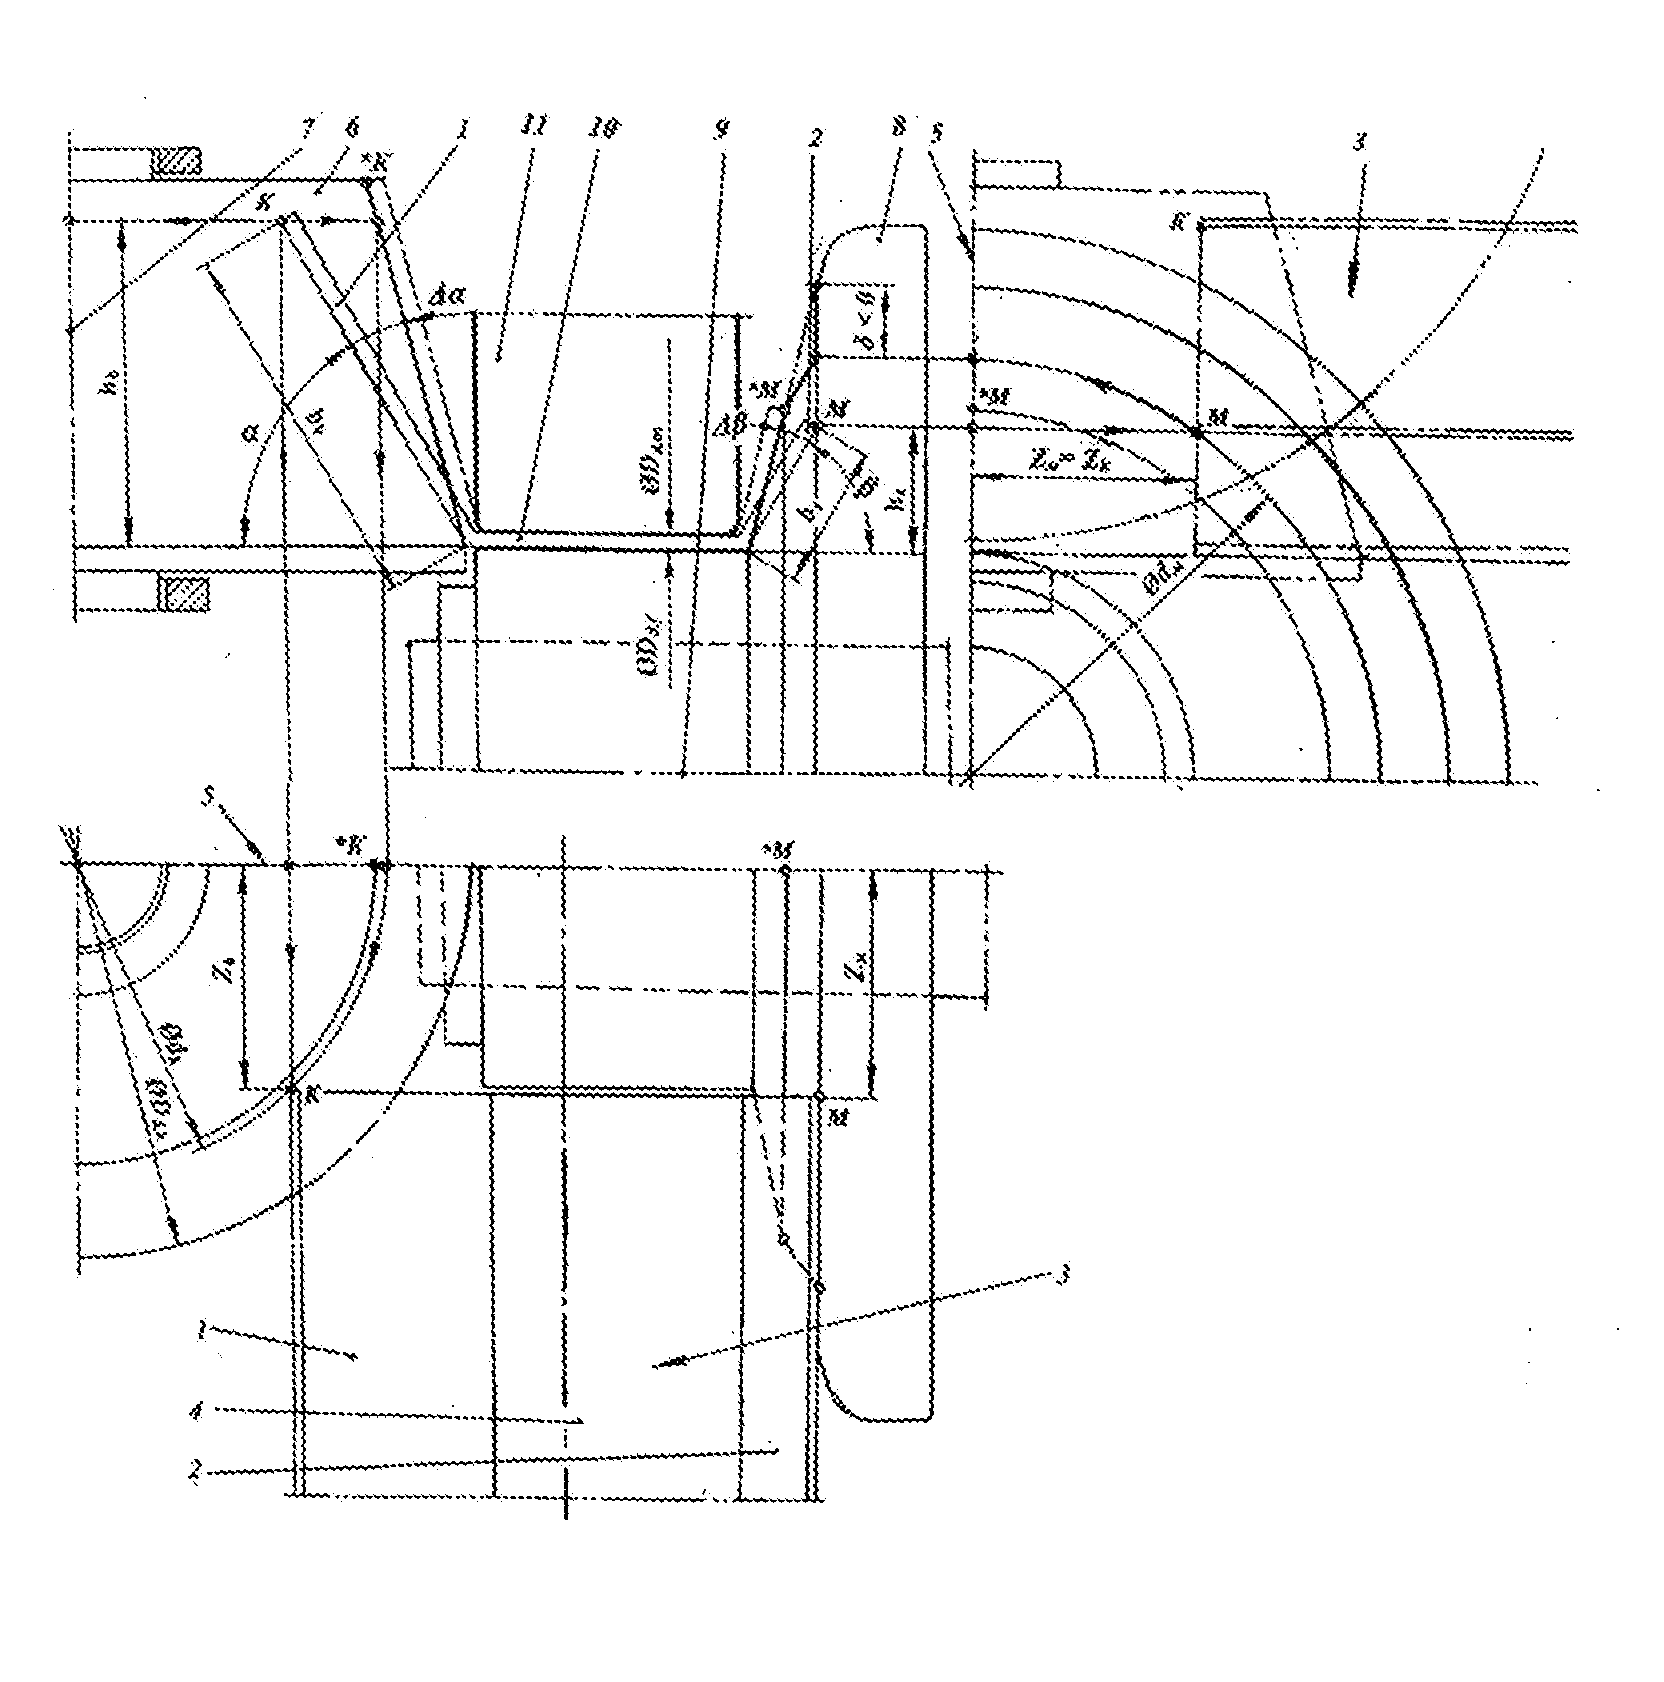 Method and Apparatus for Manufacturing Asymmetrical Roll-Formed Sections